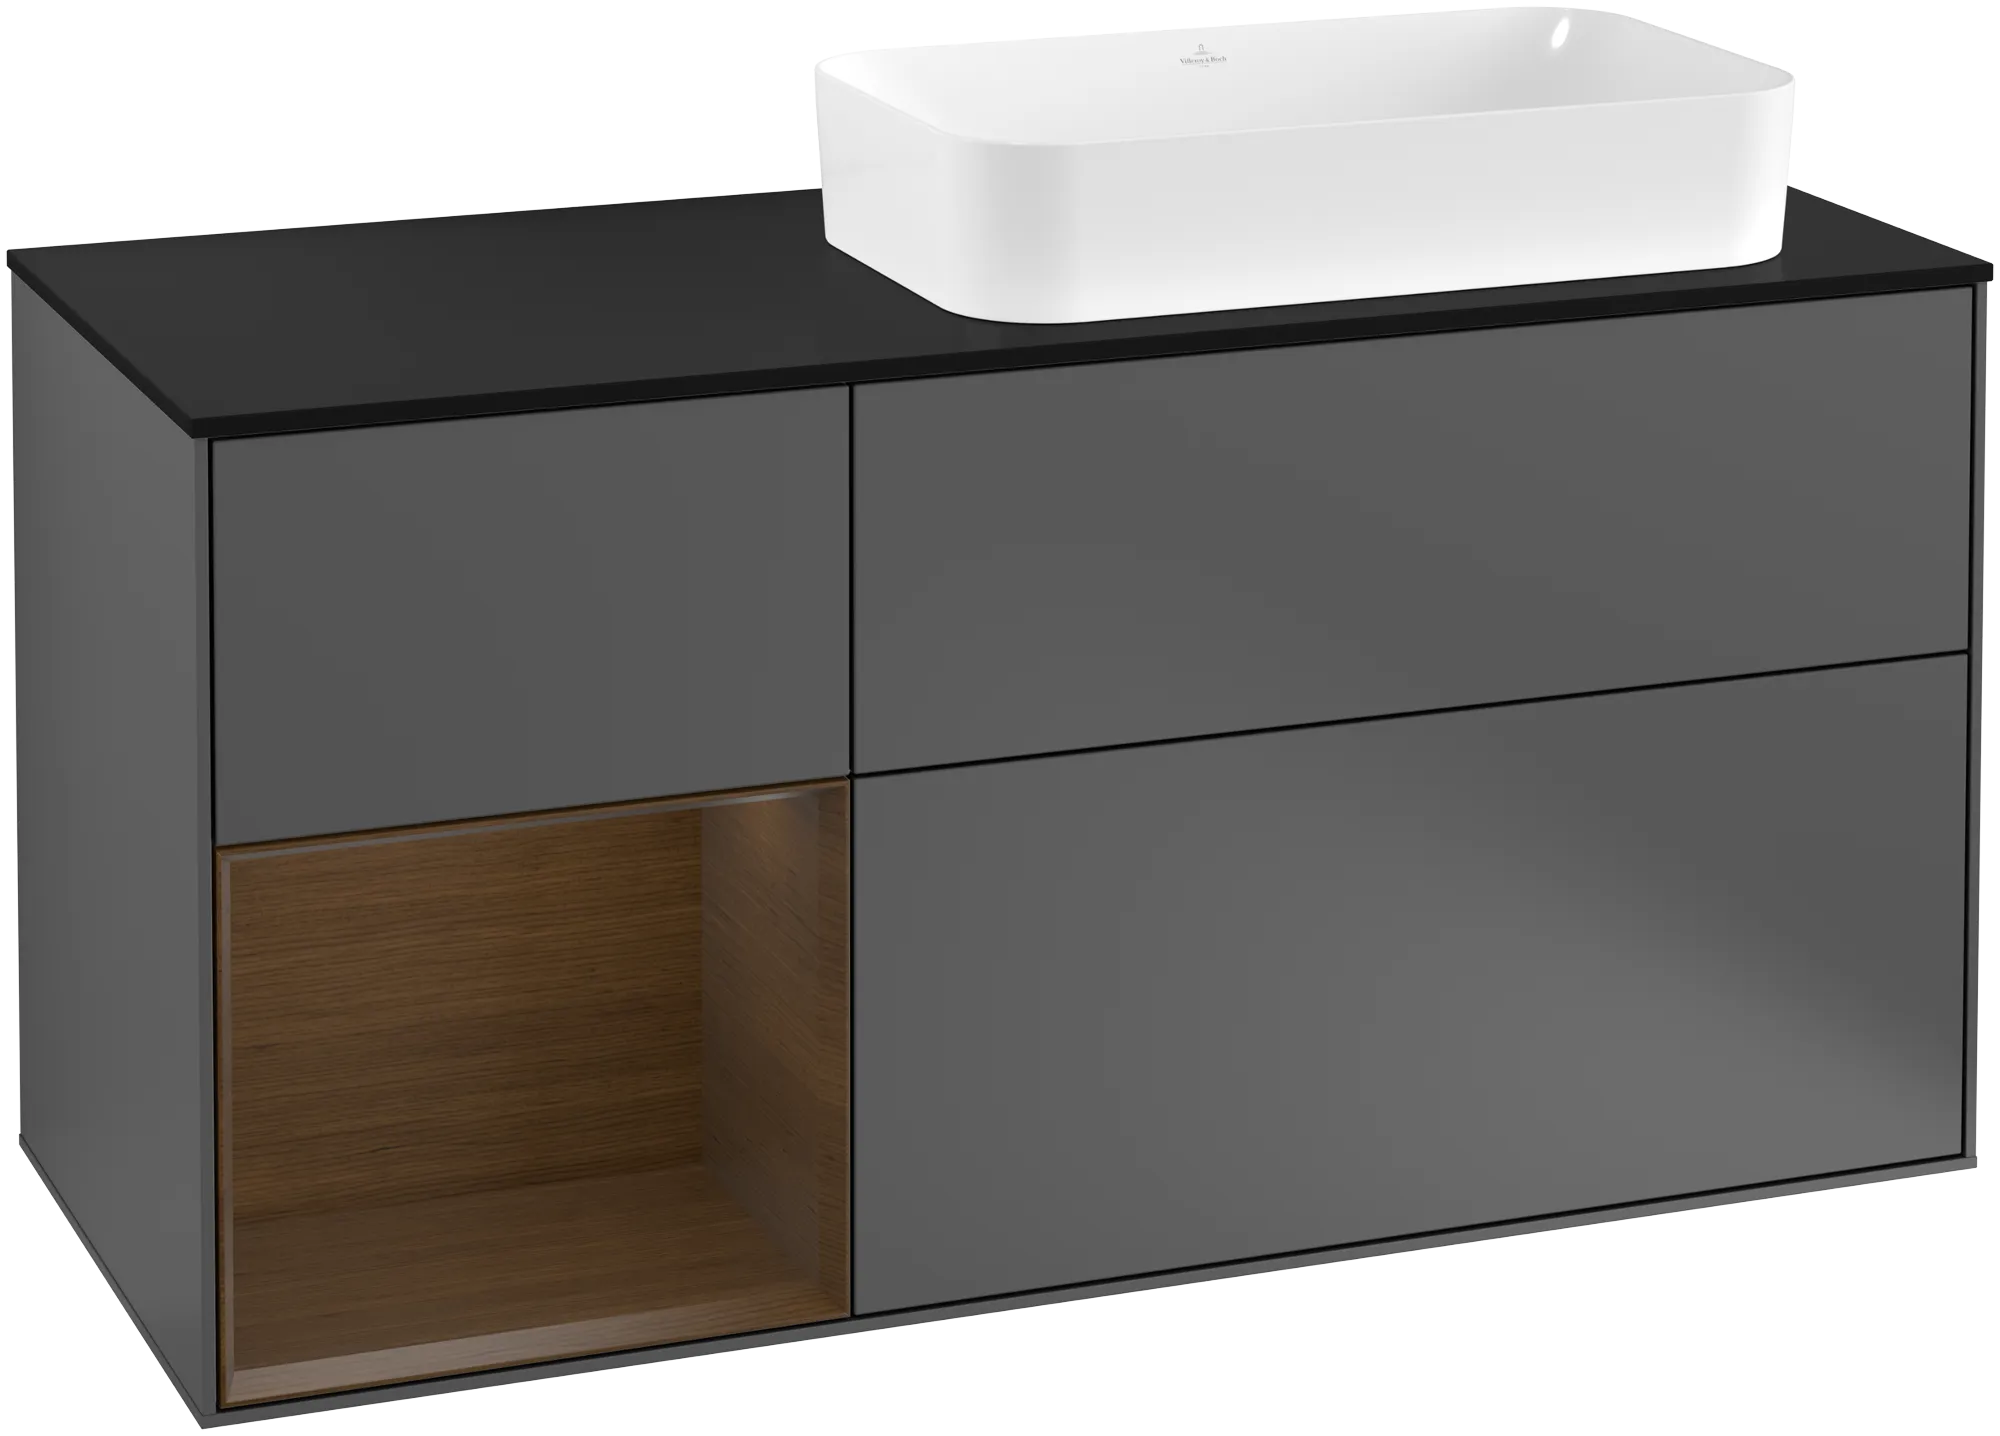 Picture of VILLEROY BOCH Finion Vanity unit, with lighting, 3 pull-out compartments, 1200 x 603 x 501 mm, Anthracite Matt Lacquer / Walnut Veneer / Glass Black Matt #G272GNGK